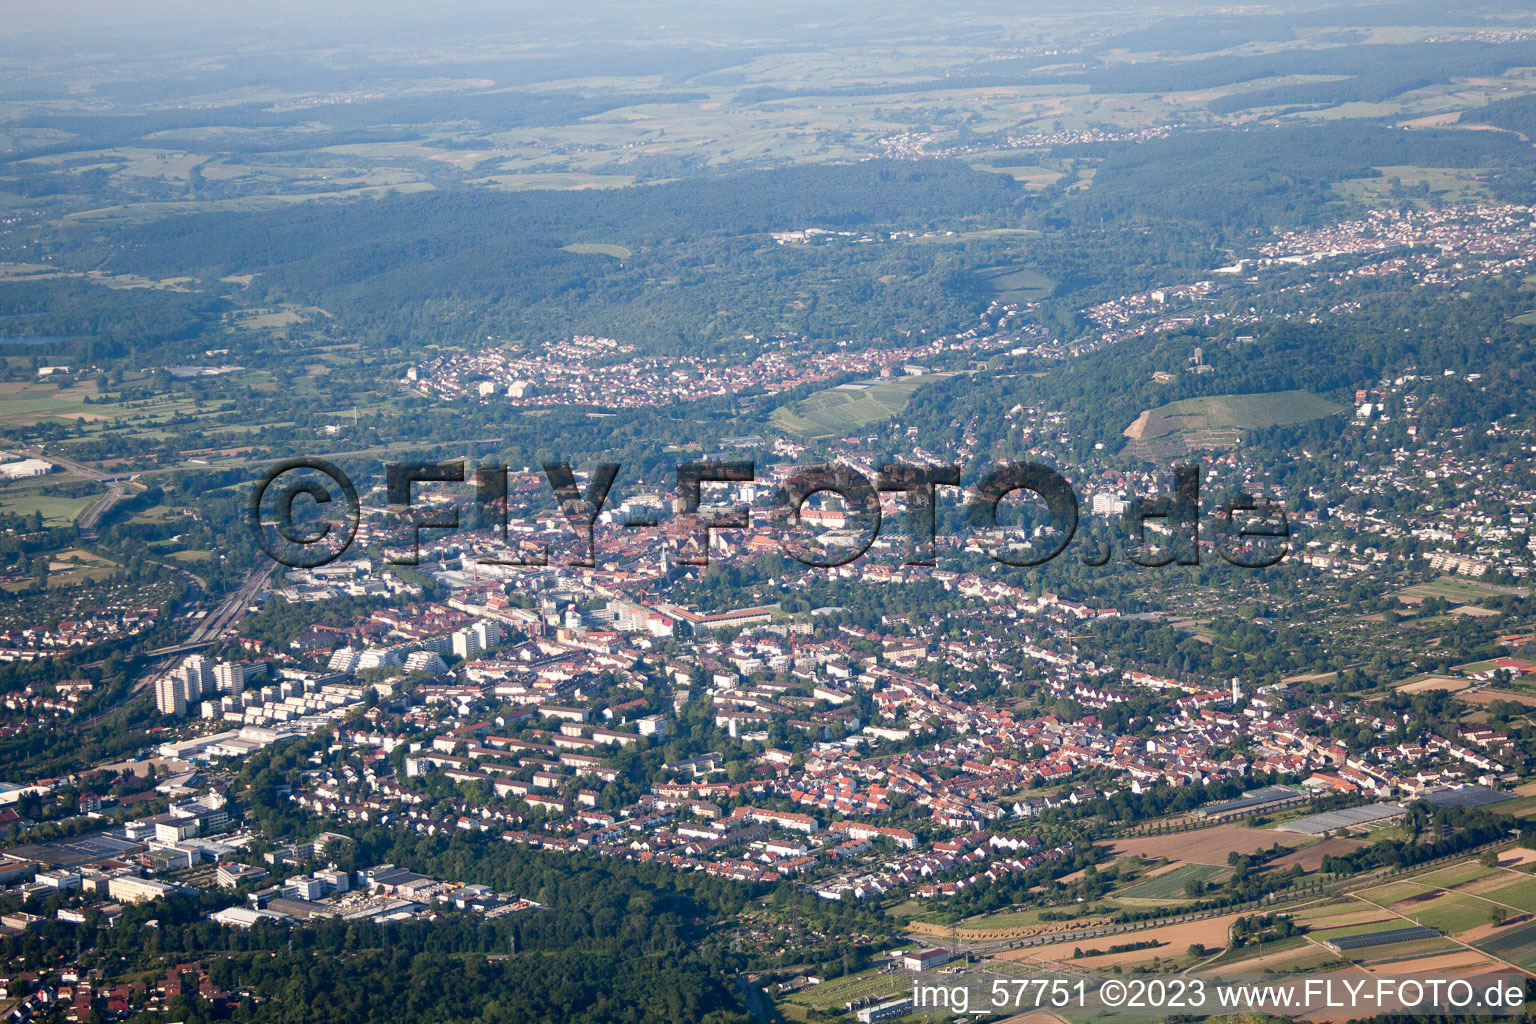 District Durlach in Karlsruhe in the state Baden-Wuerttemberg, Germany from the drone perspective